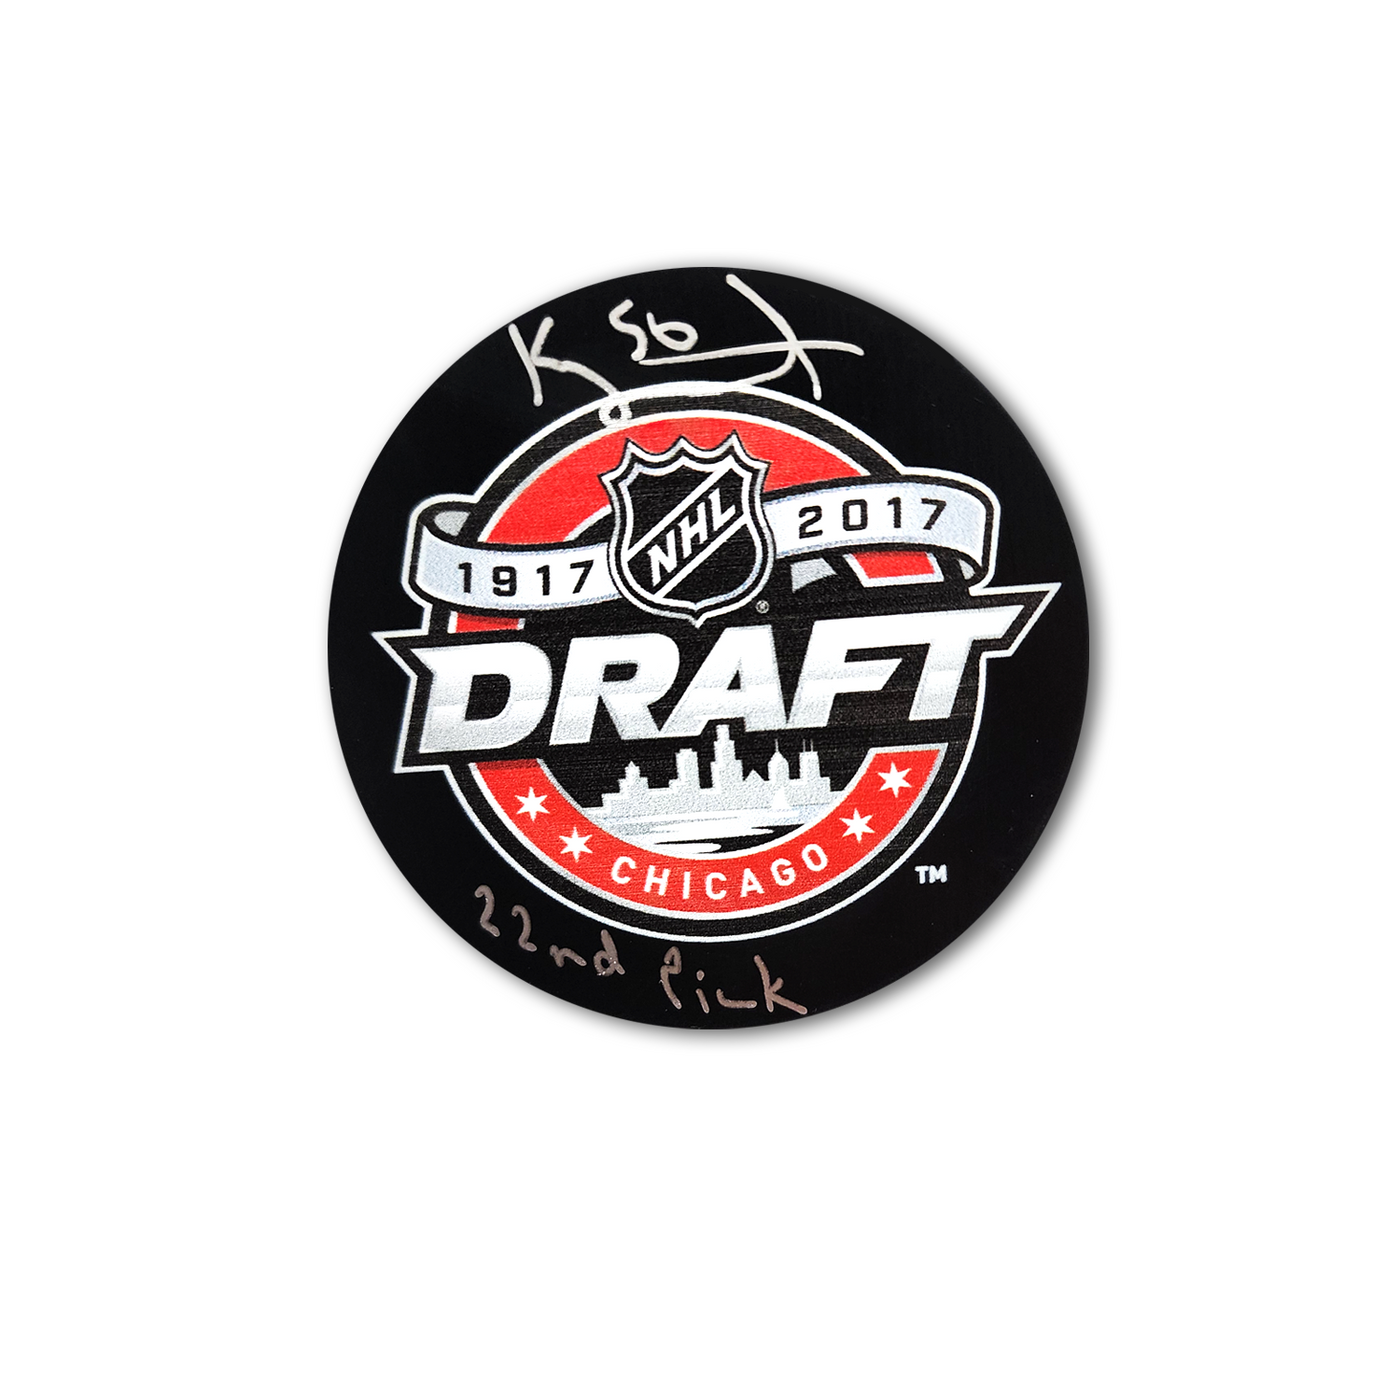 Kailer Yamamoto Autographed 2017 NHL Draft Puck Hockey Puck Inscribed 22nd Pick